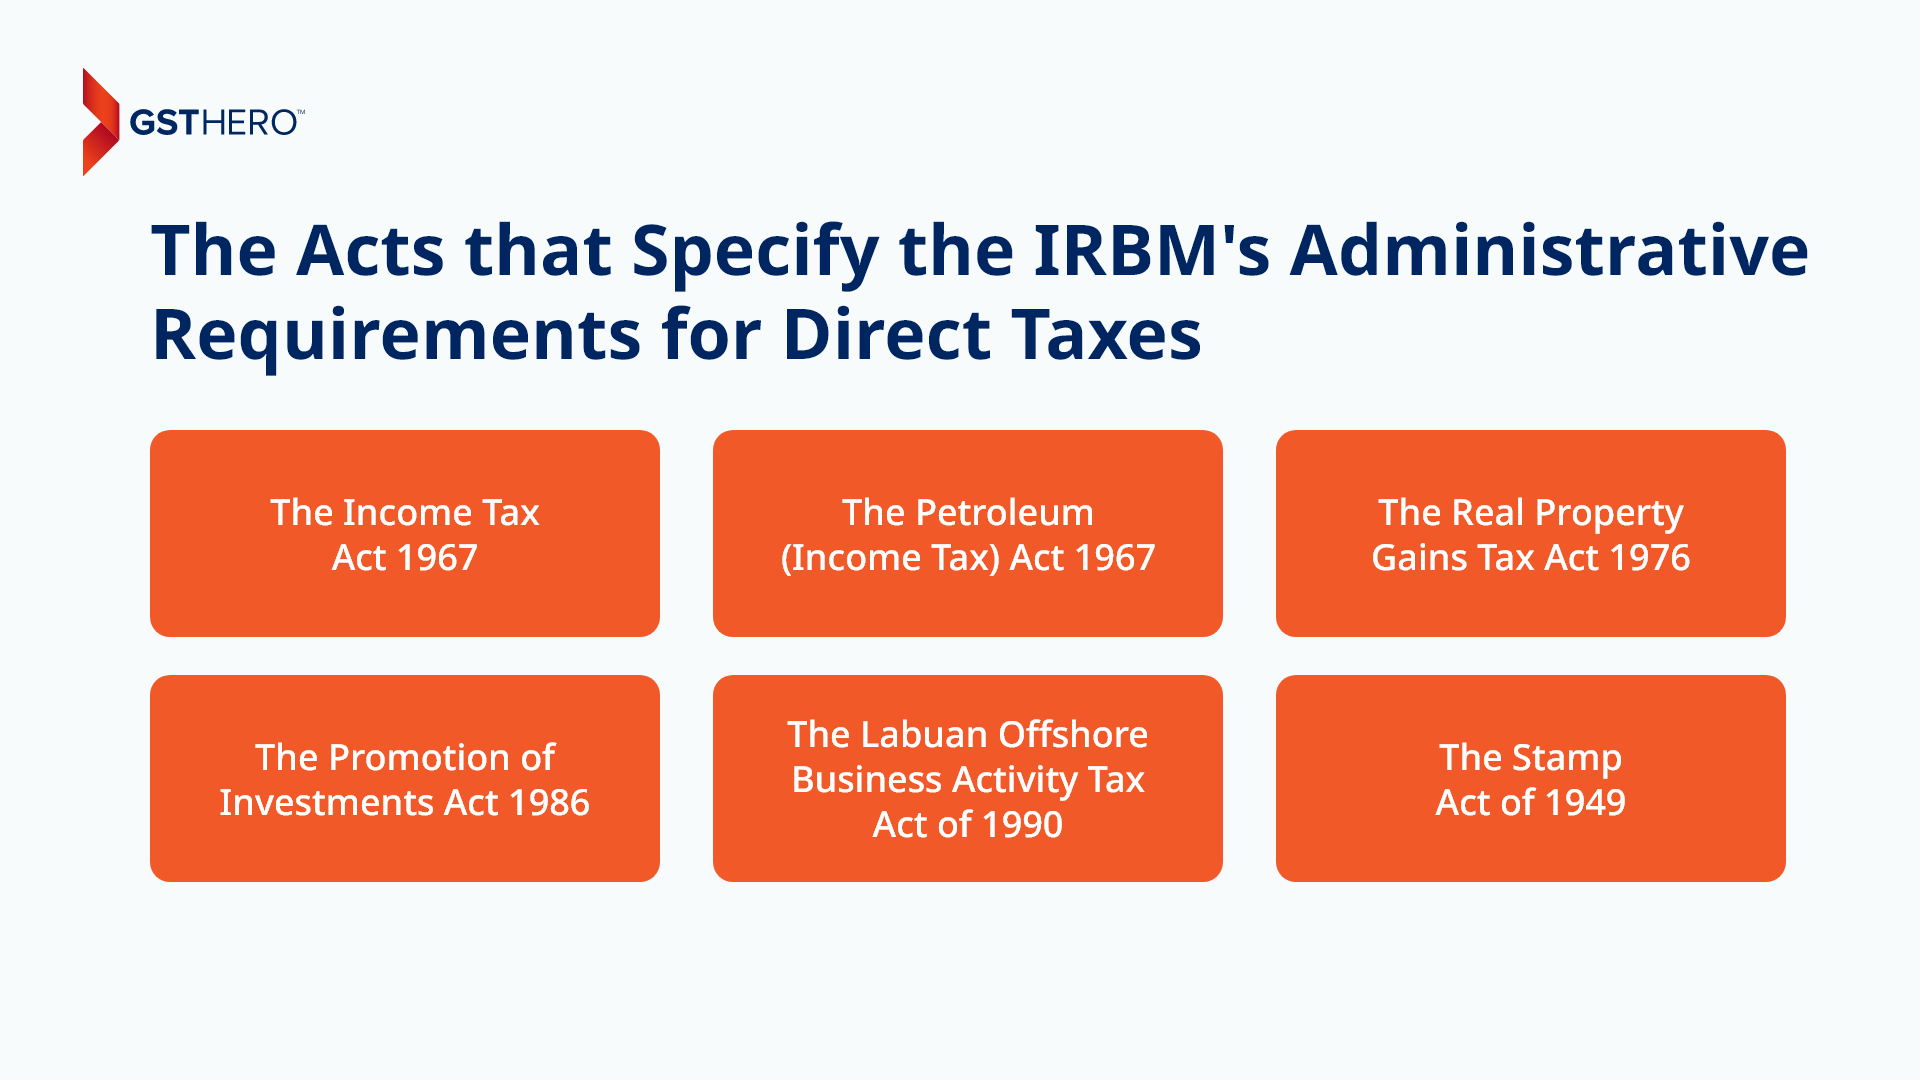 IRBM administrative requirements